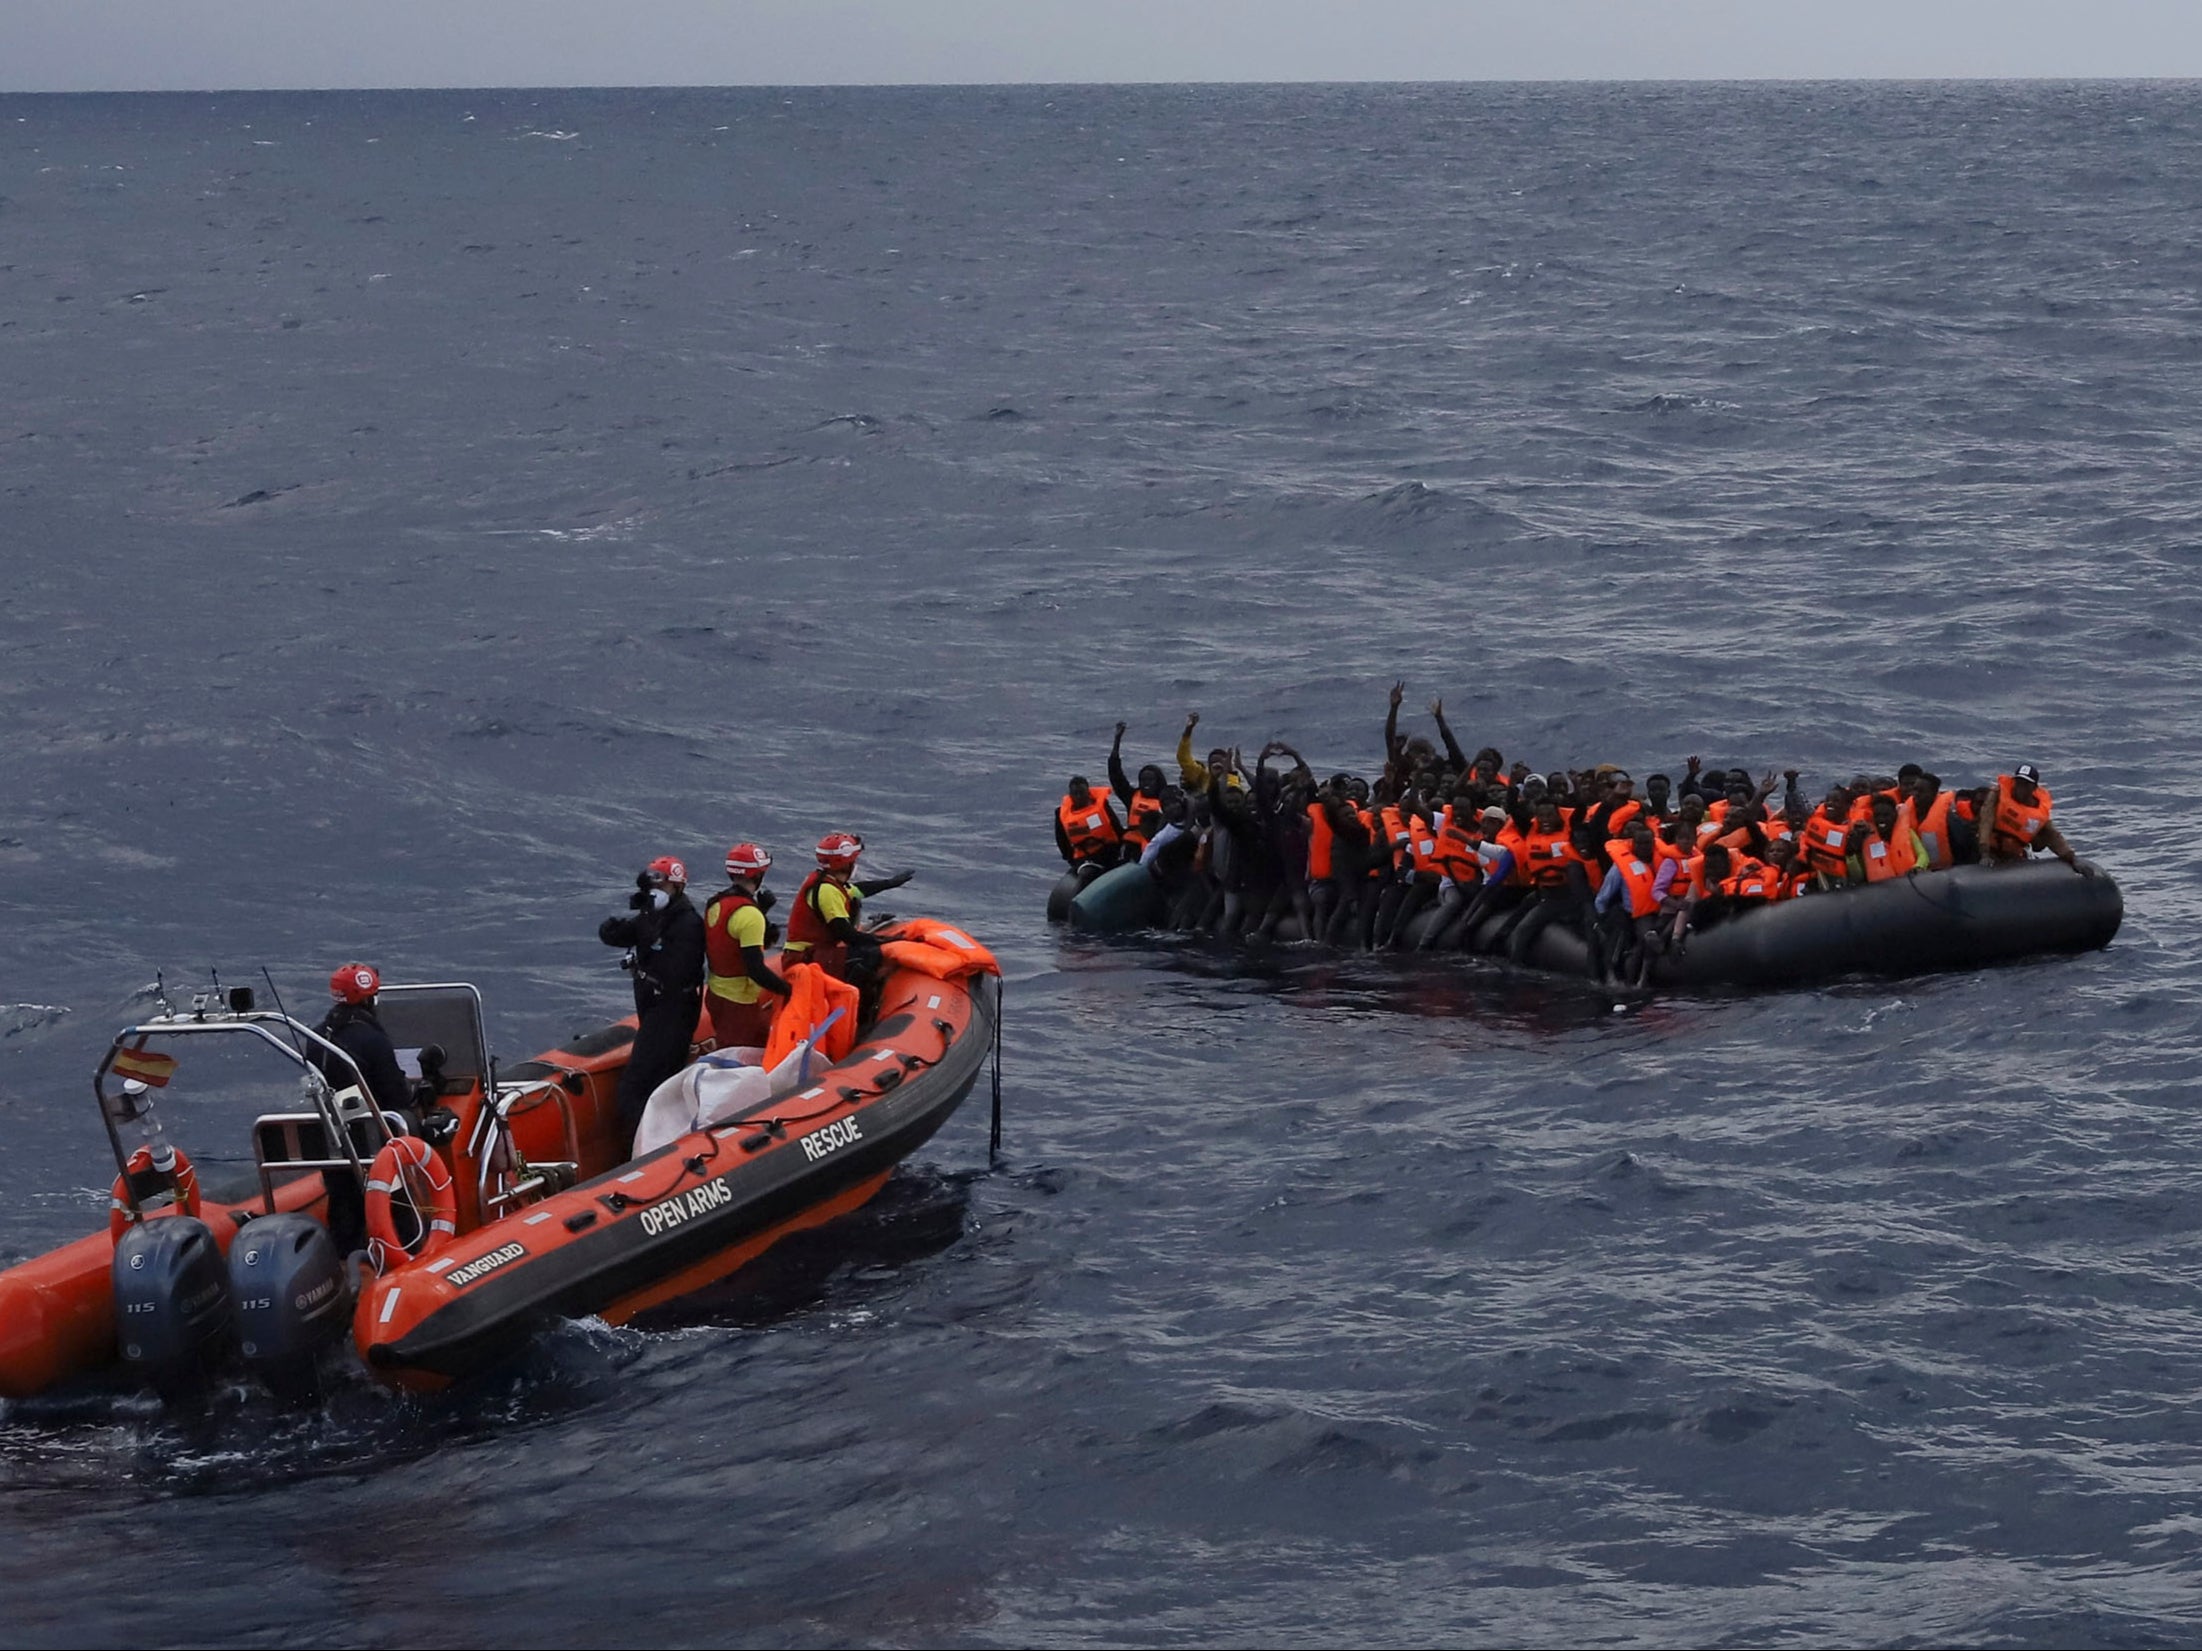 Refugees and migrants wait to be rescued by members of the Spanish NGO Proactiva Open Arms, after leaving Libya trying to reach European soil aboard an overcrowded rubber boat in the Mediterranean sea